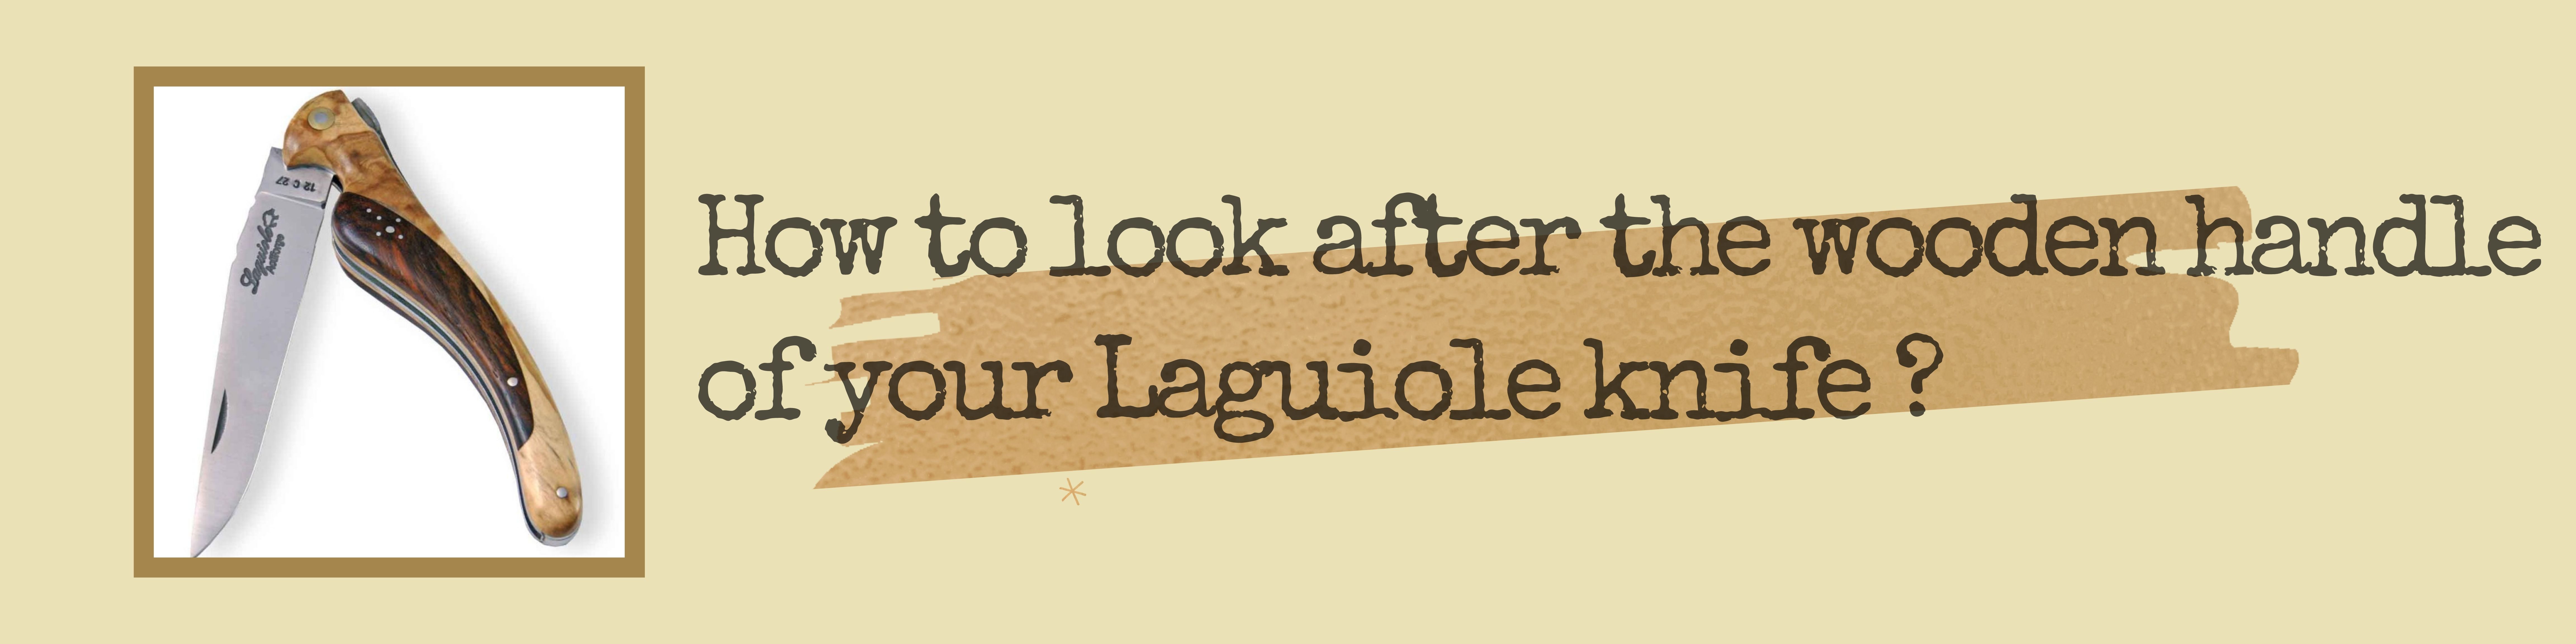 How to properly look after your Laguiole knife 